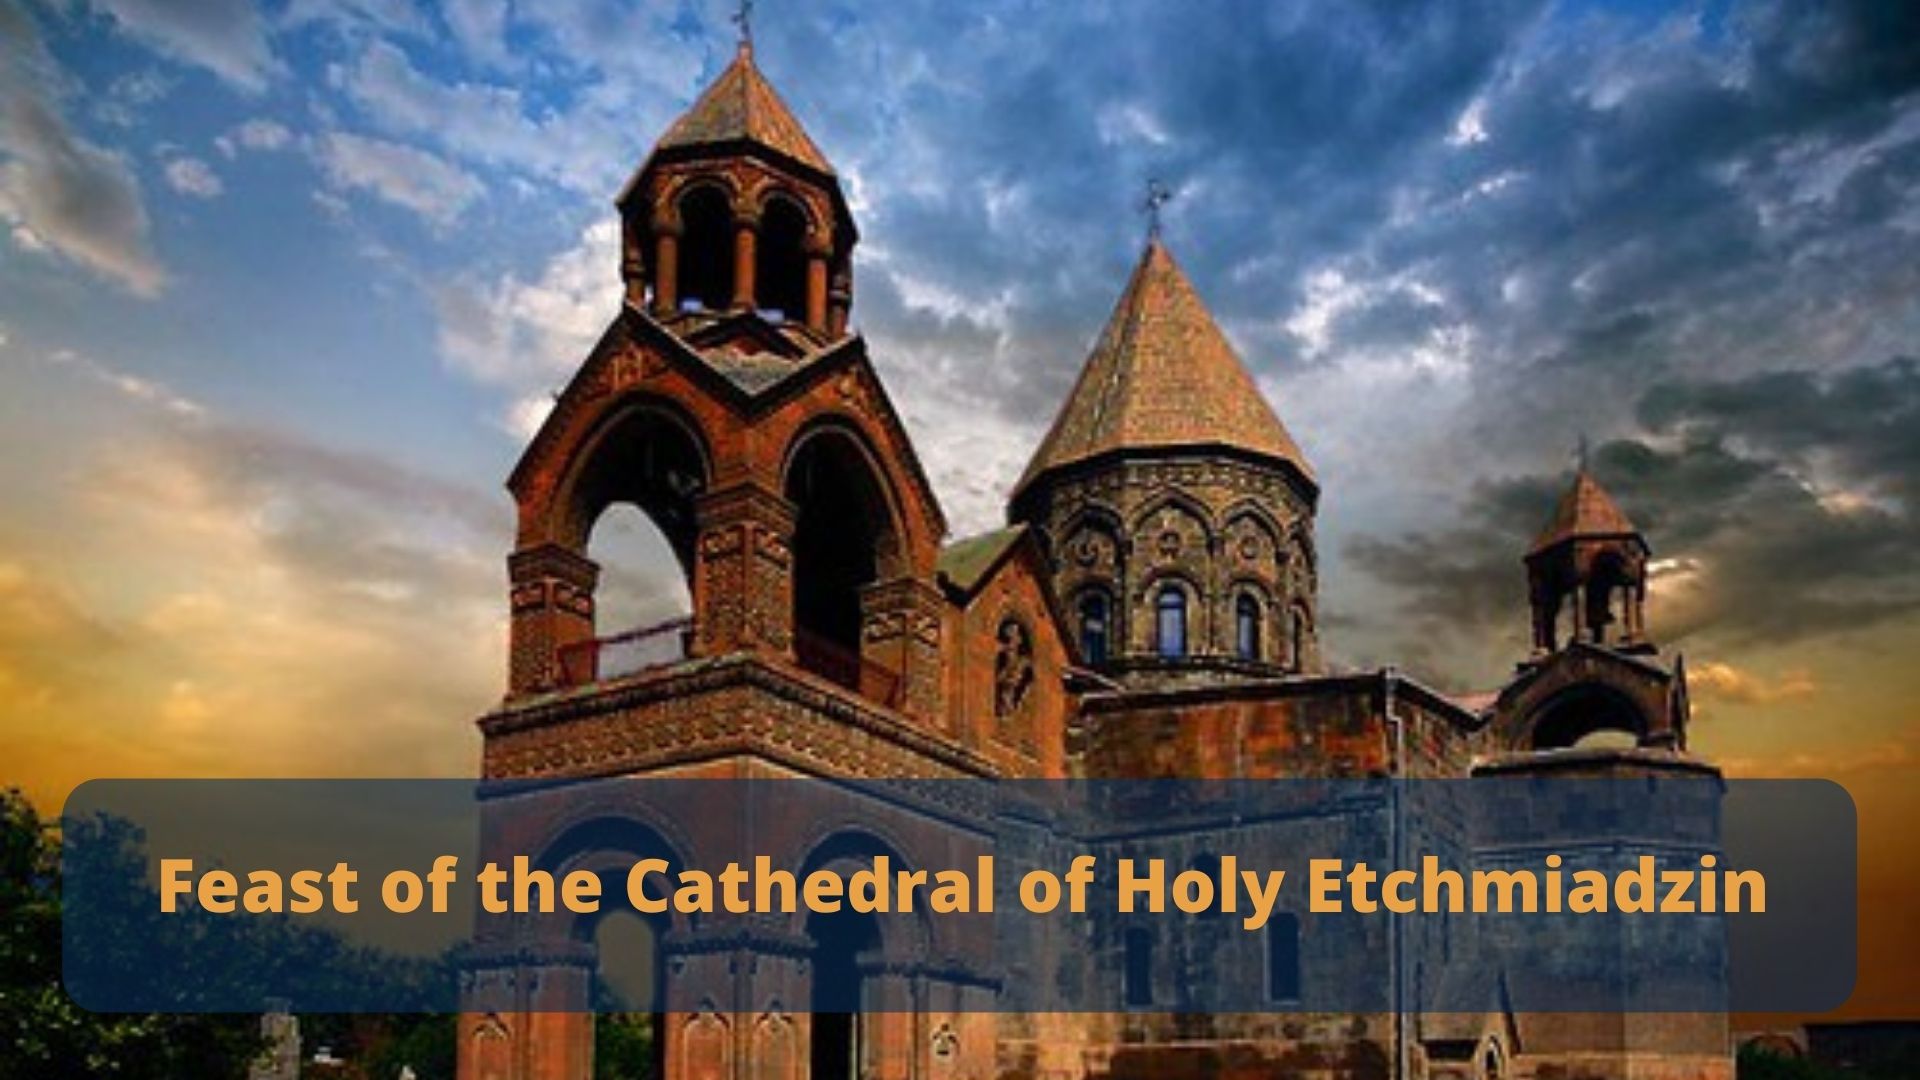 Feast of the Holy Etchmiadzin